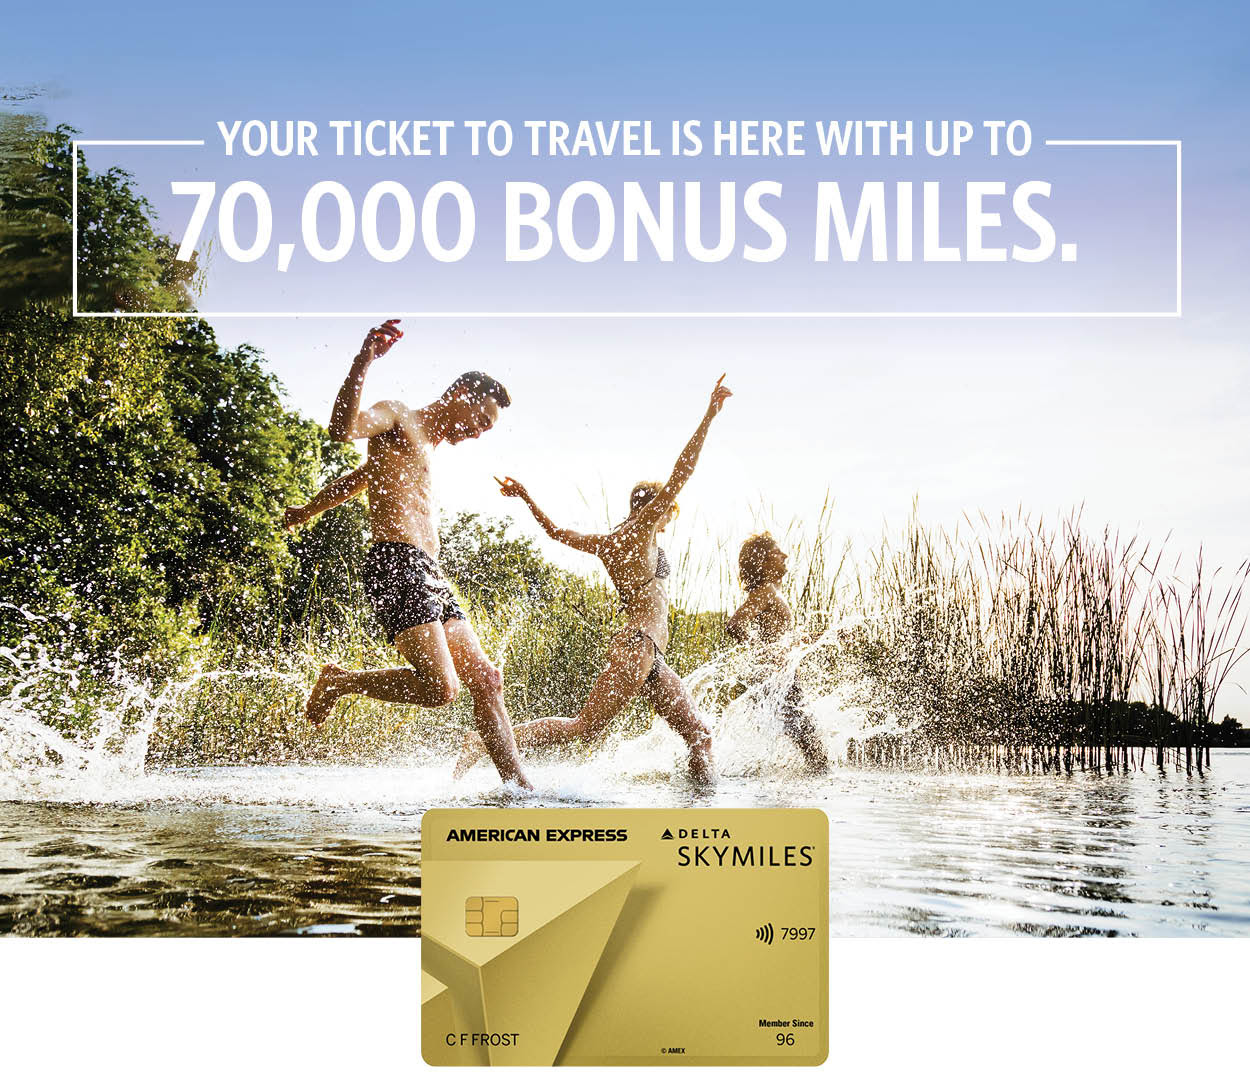 YOUR TICKET TO TRAVEL IS HERE WITH UP TO 70,000 BONUS MILES.